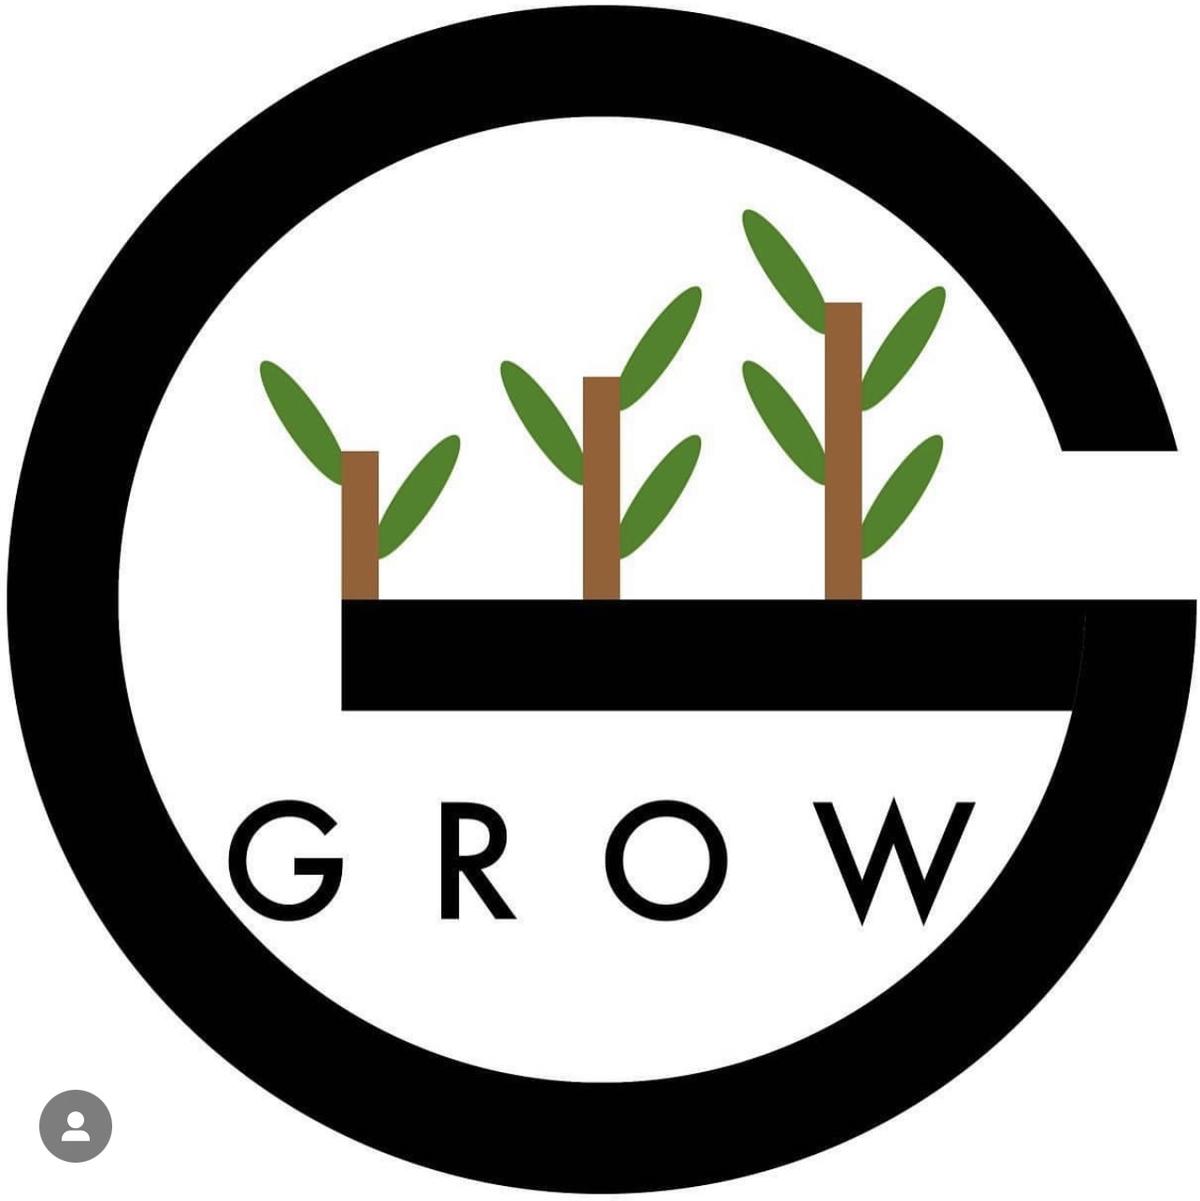 GROW_'s images